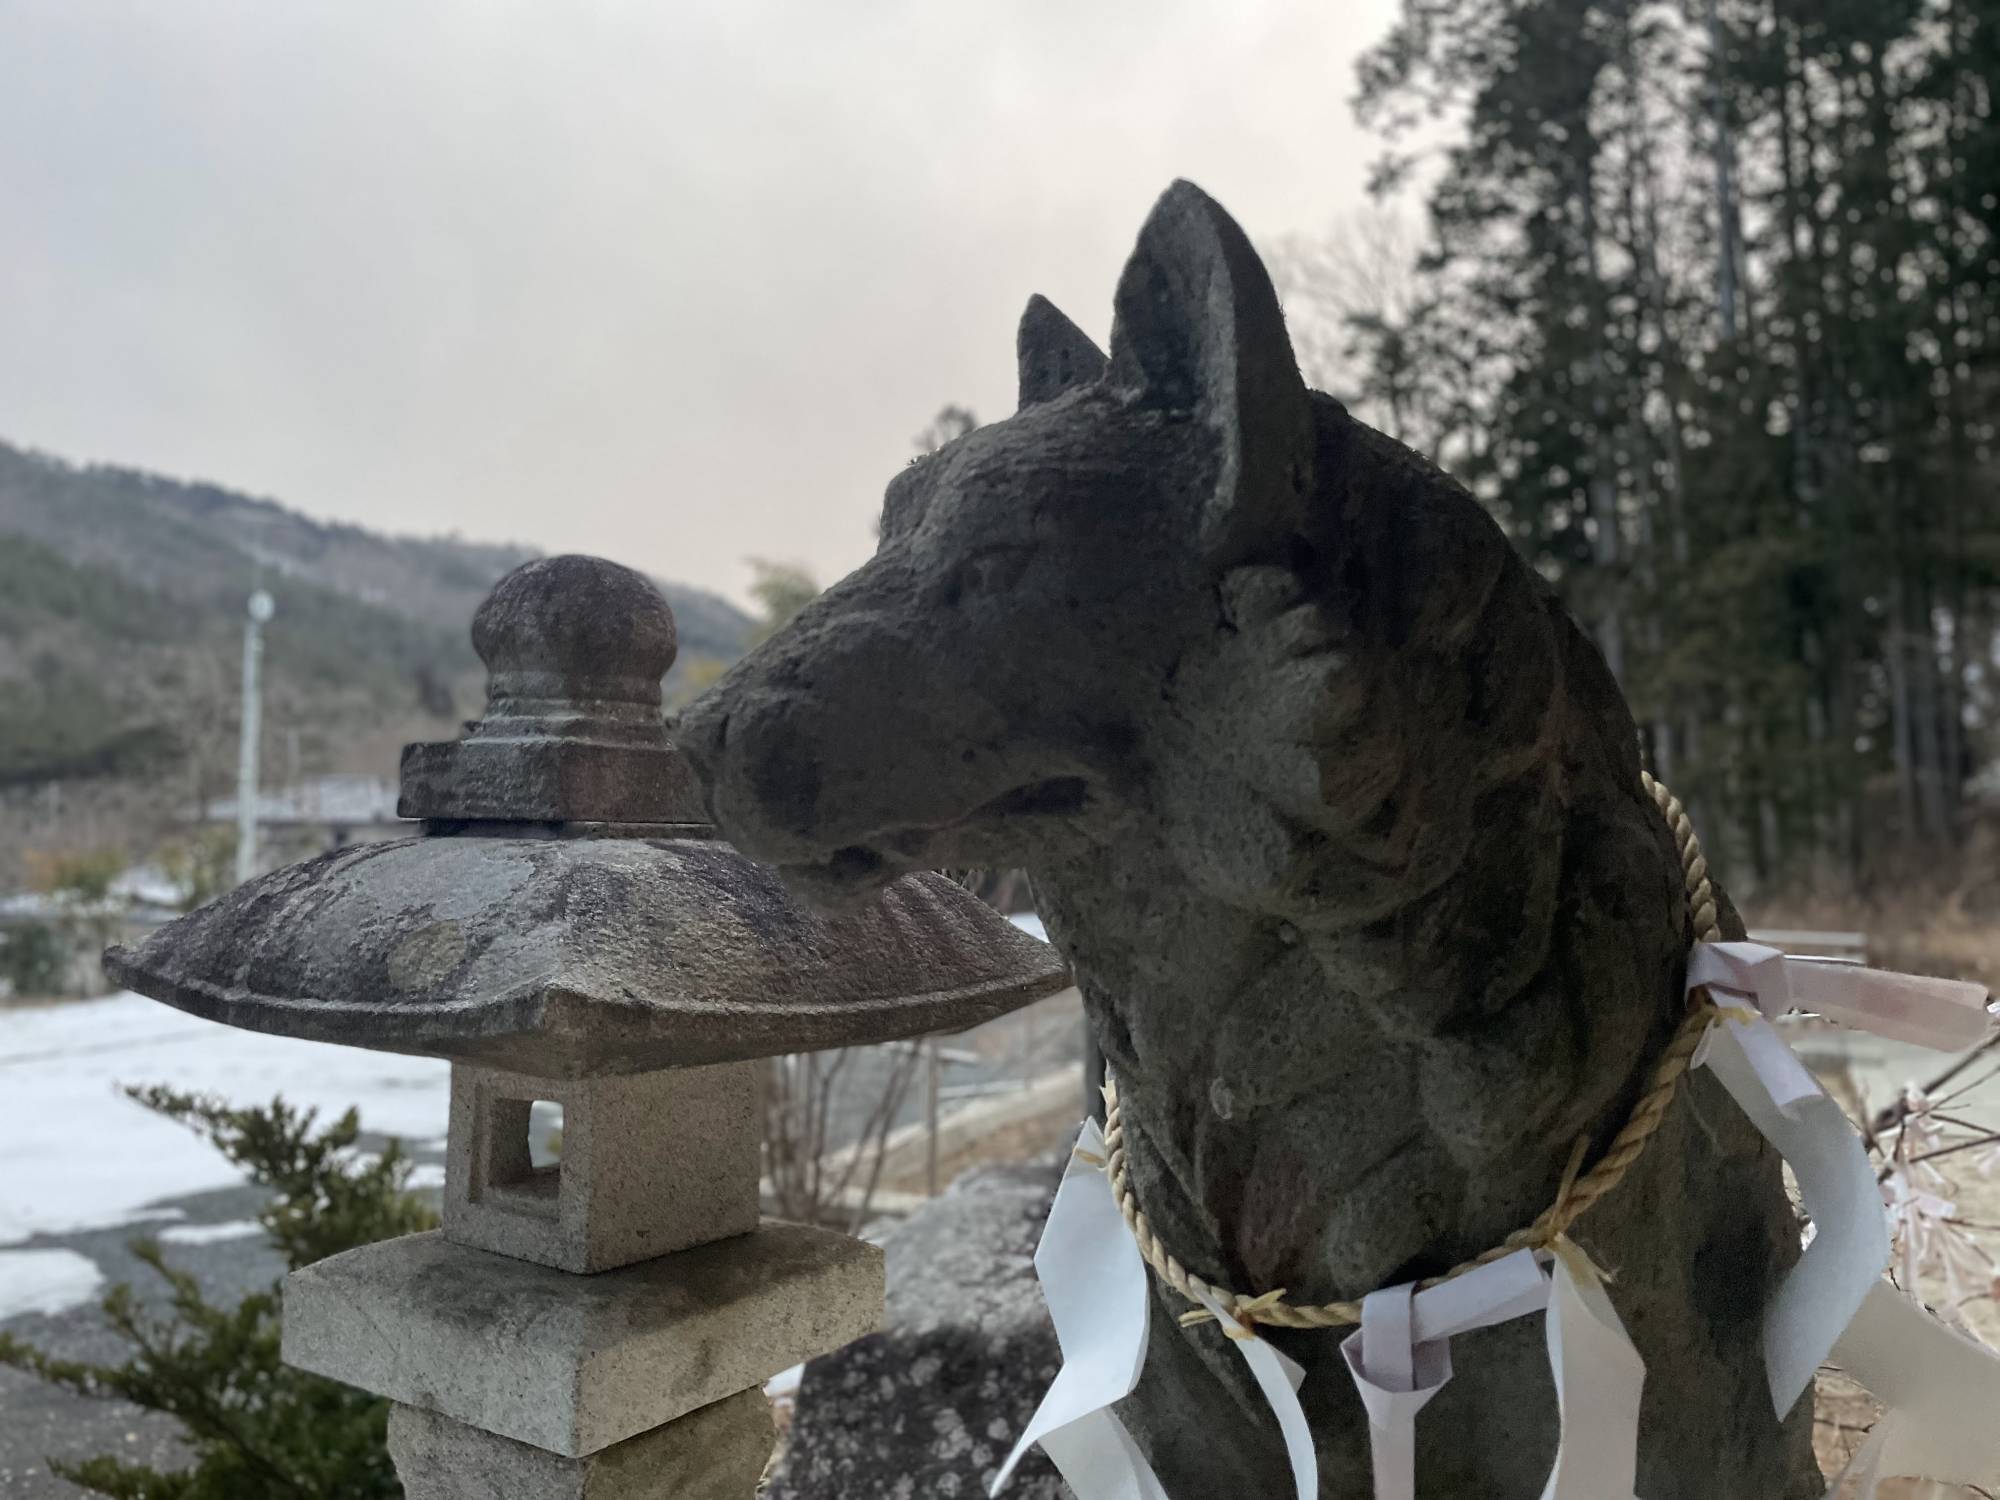 A stone wolf statue guards the entrance to Yamatsumi Shrine in the village of Iitate, Fukushima Prefecture. The Japanese wolf, considered extinct since 1905, has been worshiped in parts of Japan as a divine messenger and protector of farmland by preying on crop raiders — pests that have become a growing nuisance in the region following the 2011 Fukushima nuclear disaster. | ALEX K.T. MARTIN